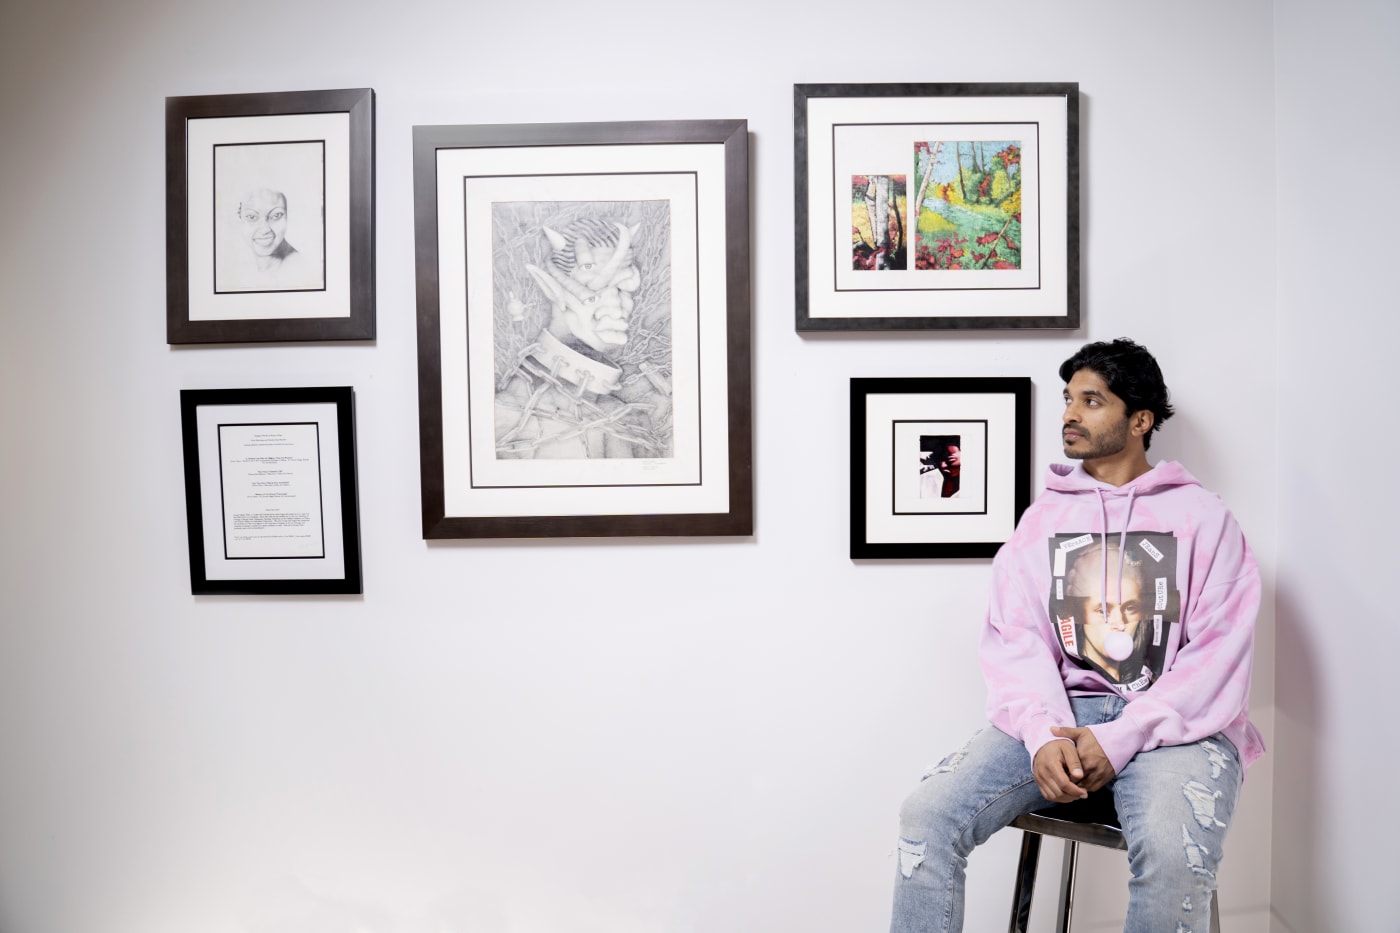 Meet the Collector Who Purchased Kanye West’s Art from High School